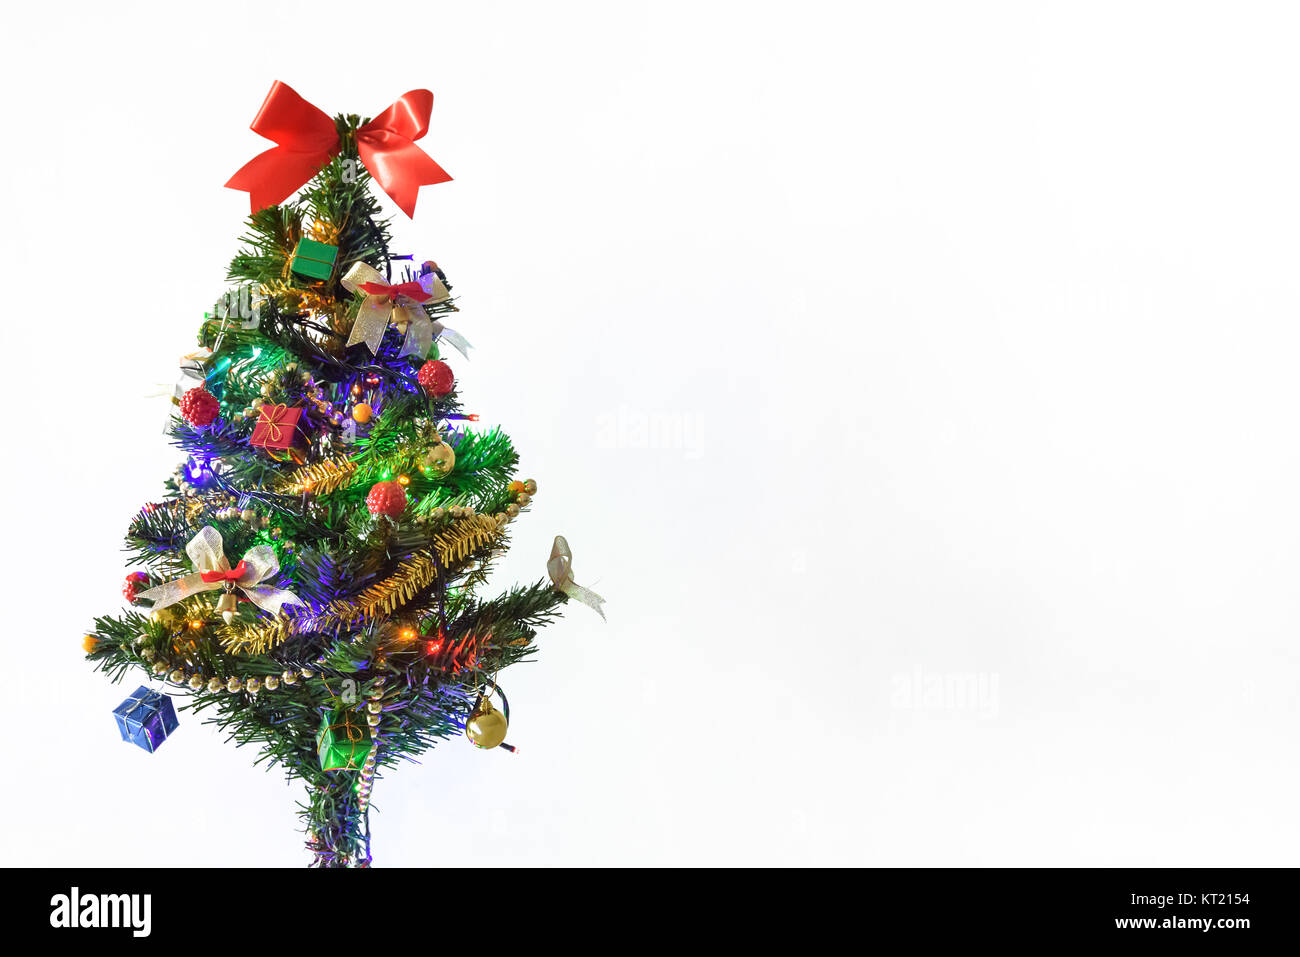 decorated christmas tree with light and gift on white background, 2018 happy new year concept, copyspace Stock Photo